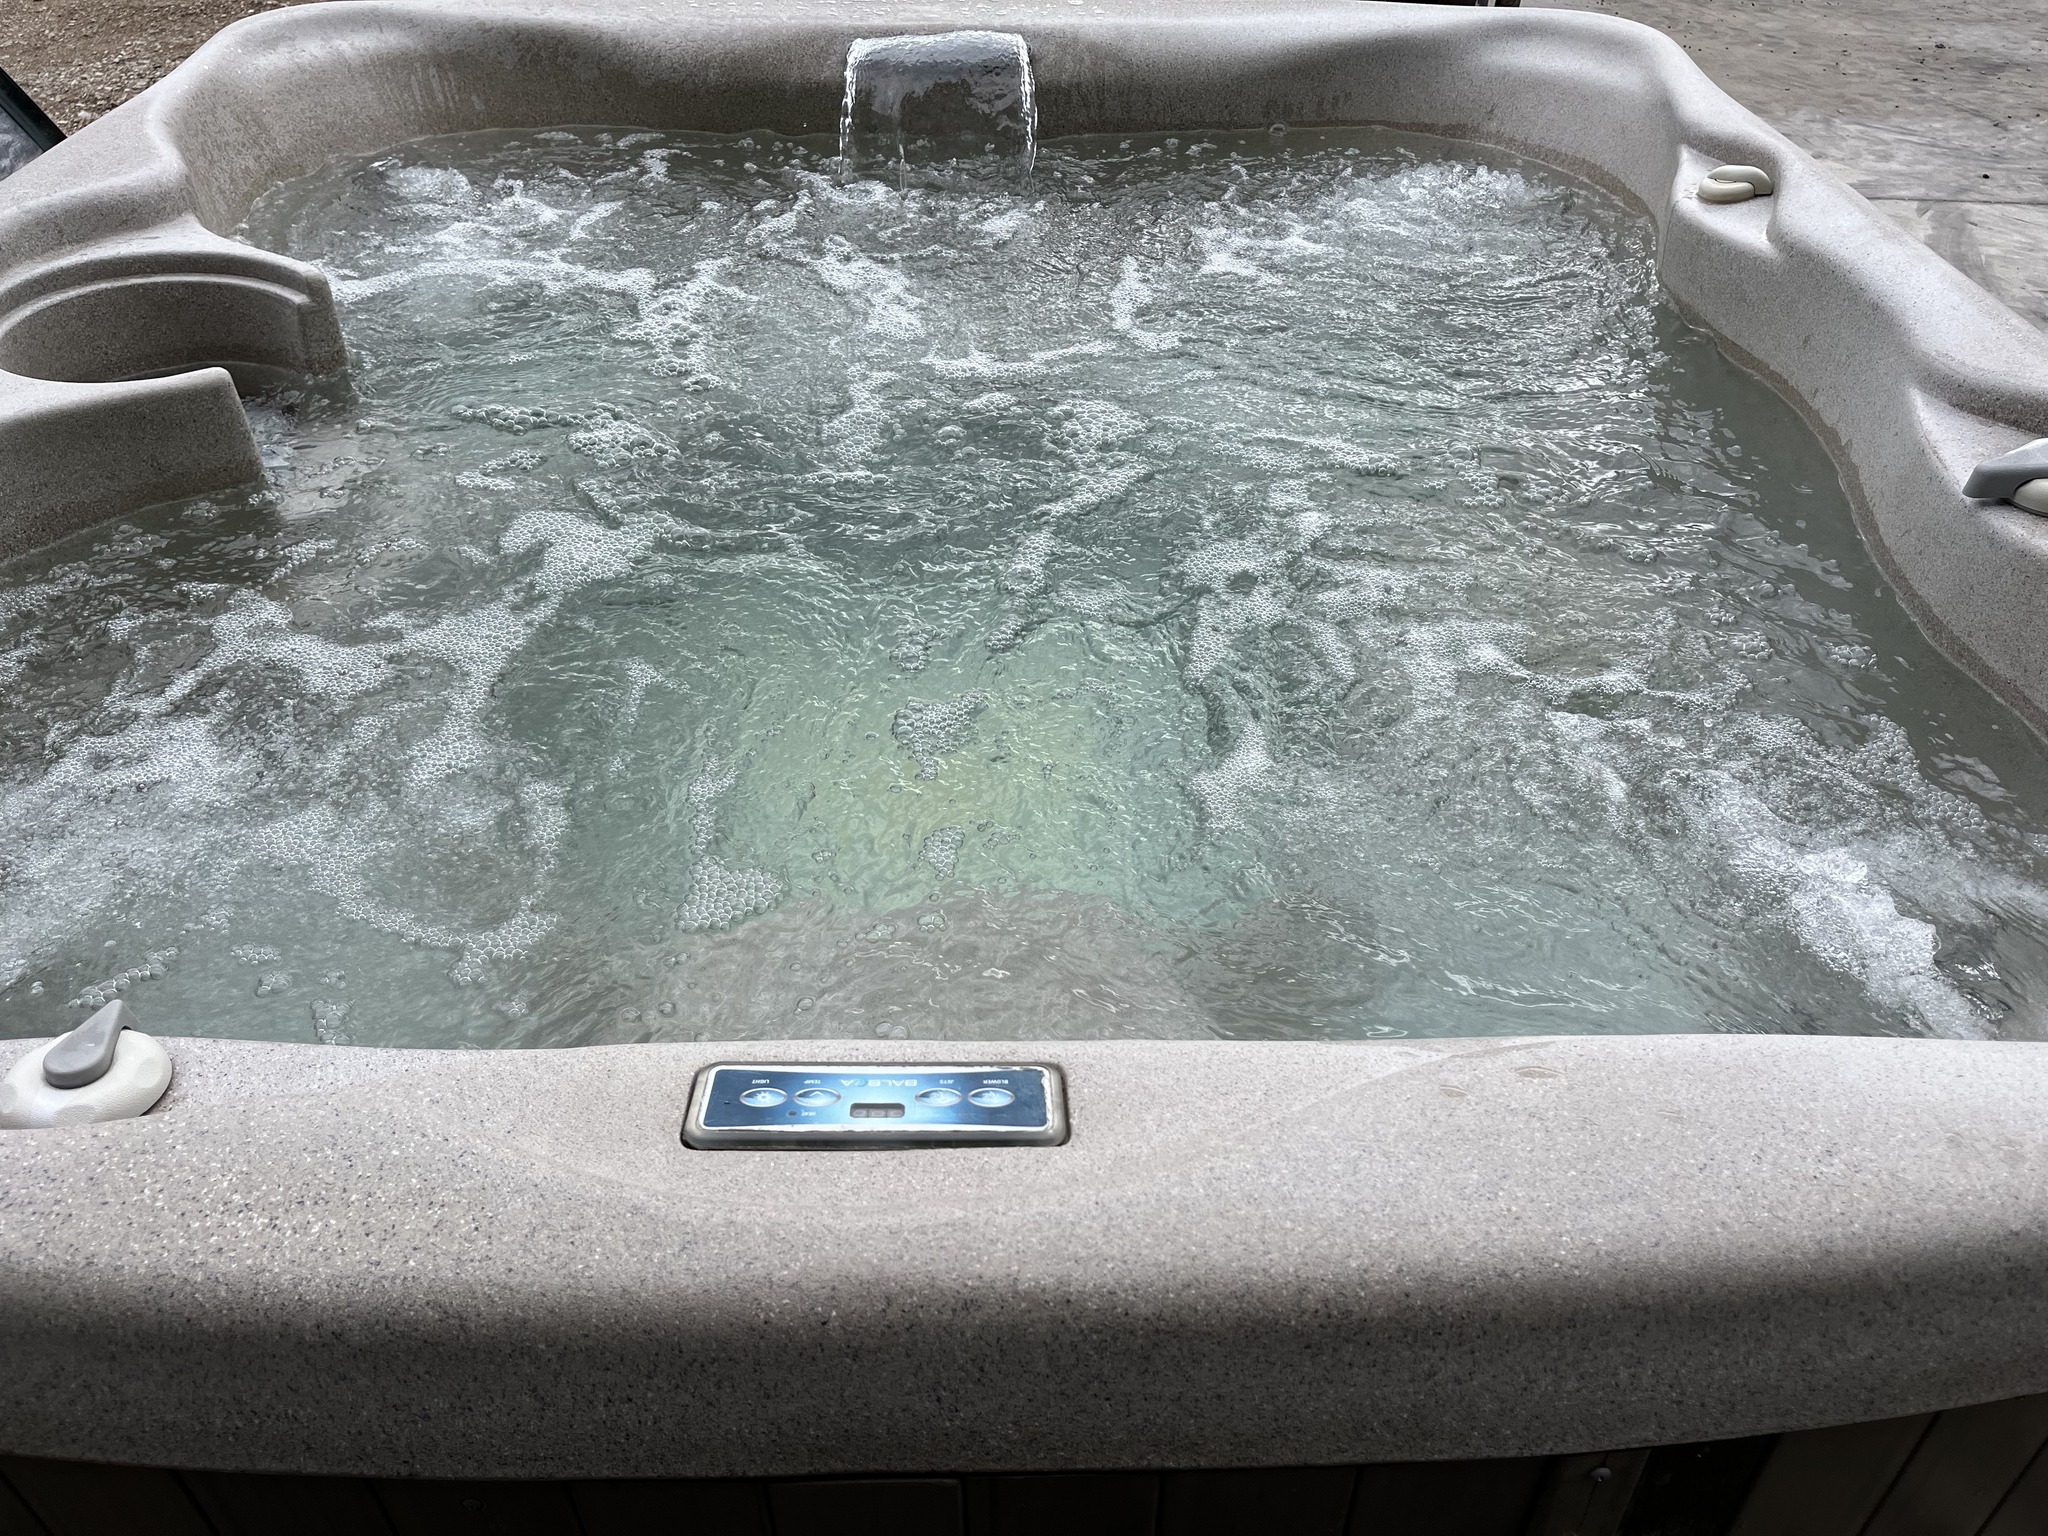 For Sale: FreeFlow Spa Plug and Play – $1,995 + tax